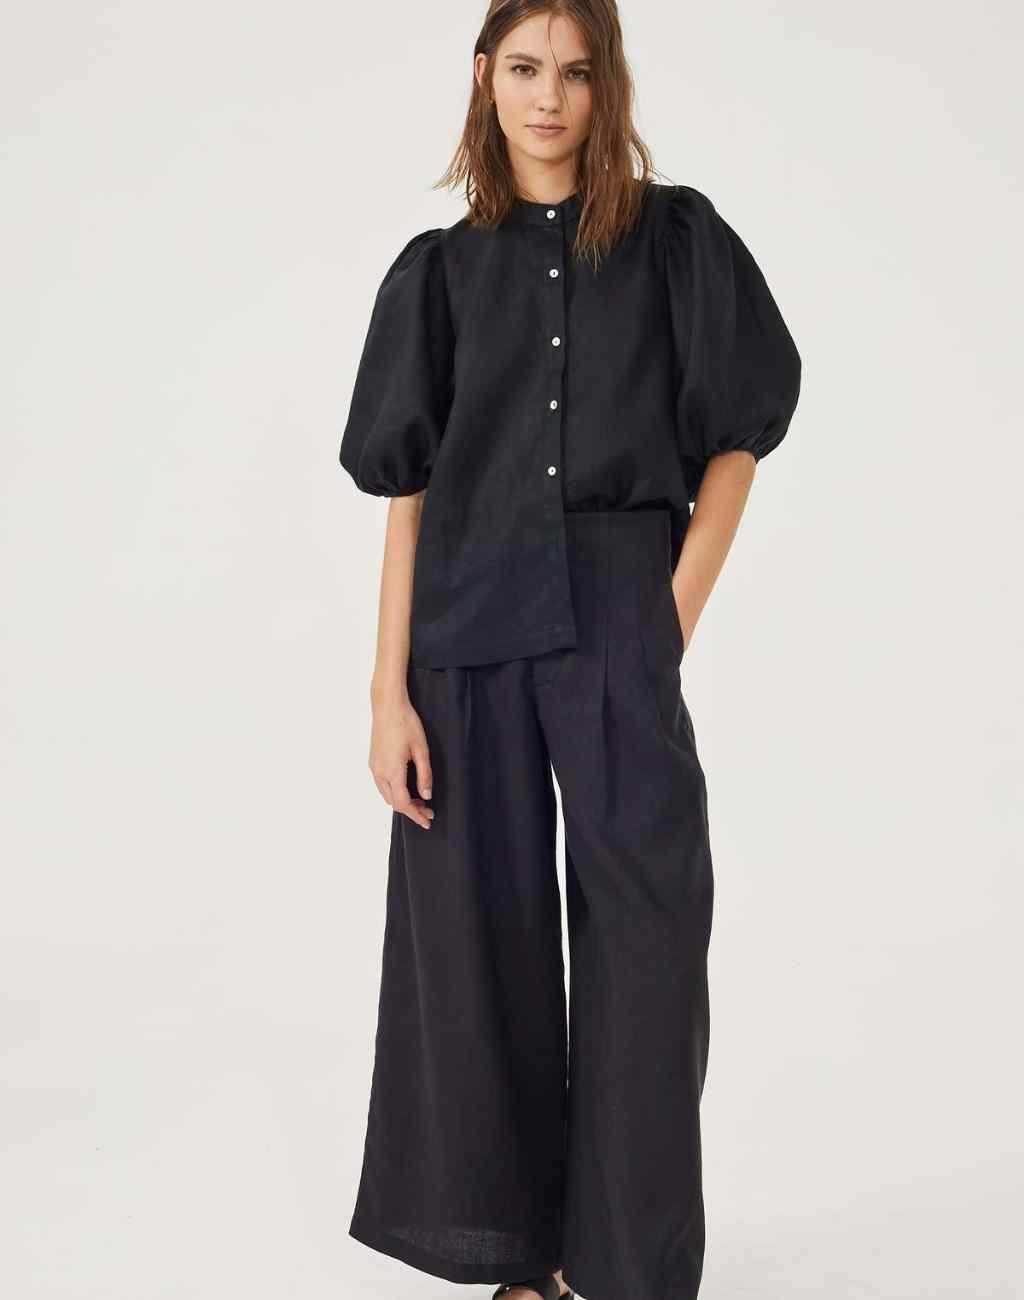 Puffed Sleeve Black Linen Top | Feminine and Flattering | Button Front - Visit Nifty Lanhtropy 